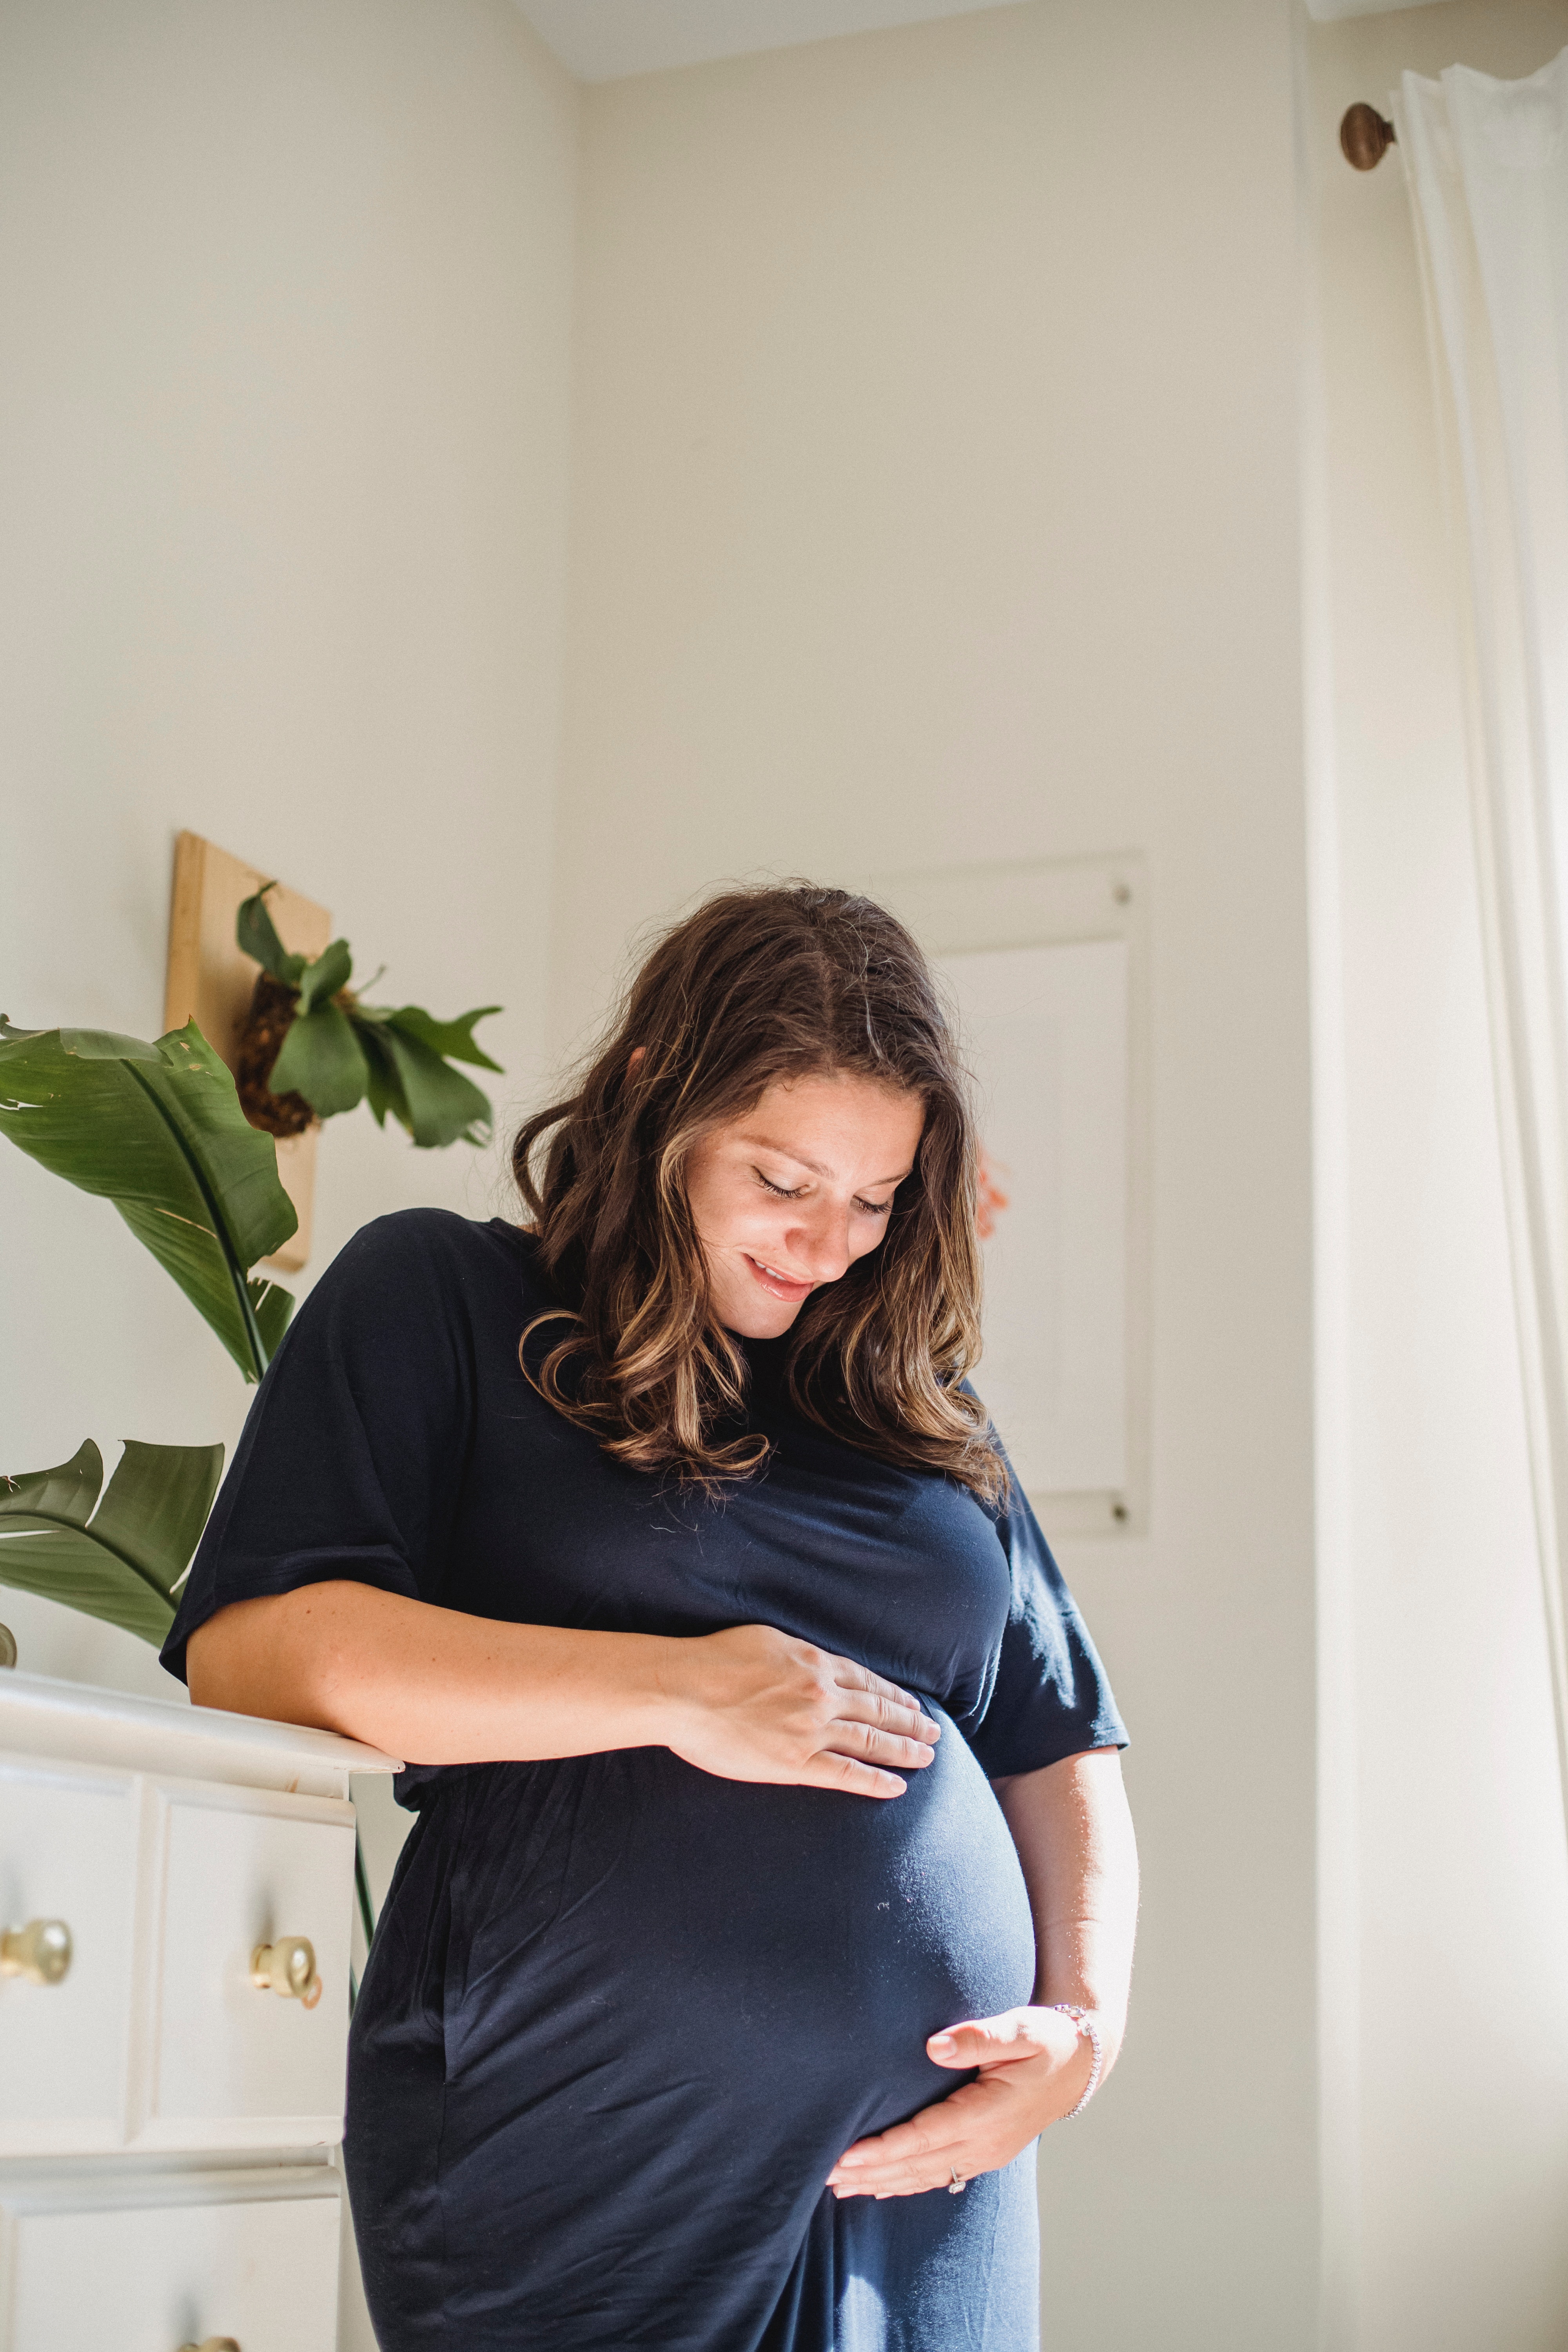 The woman took care of herself so she could have a healthy baby. | Source: Pexels